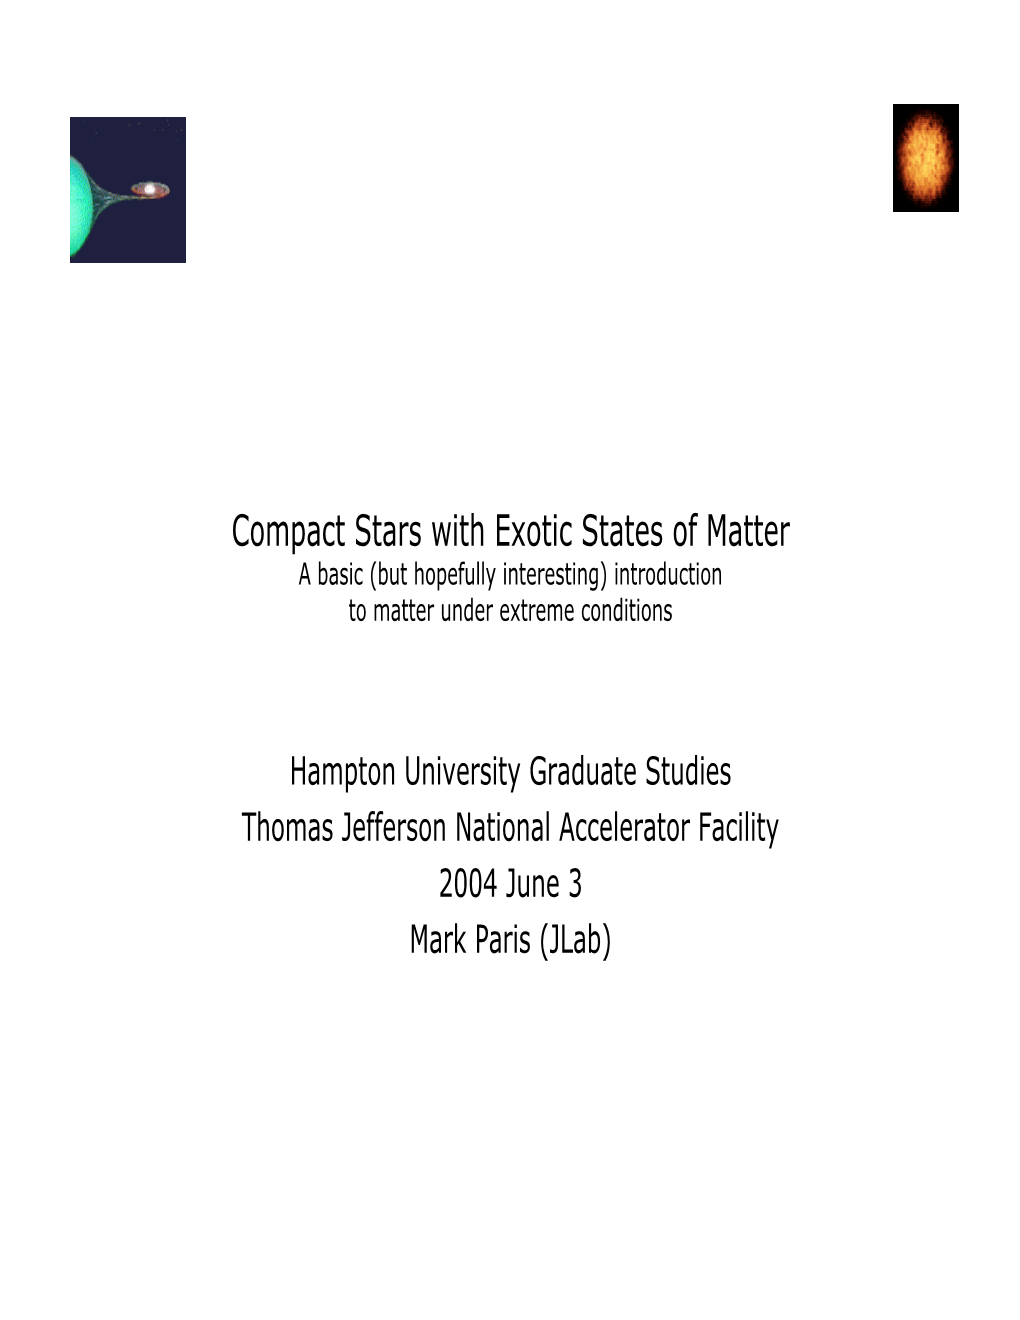 Compact Stars with Exotic States of Matter a Basic (But Hopefully Interesting) Introduction to Matter Under Extreme Conditions